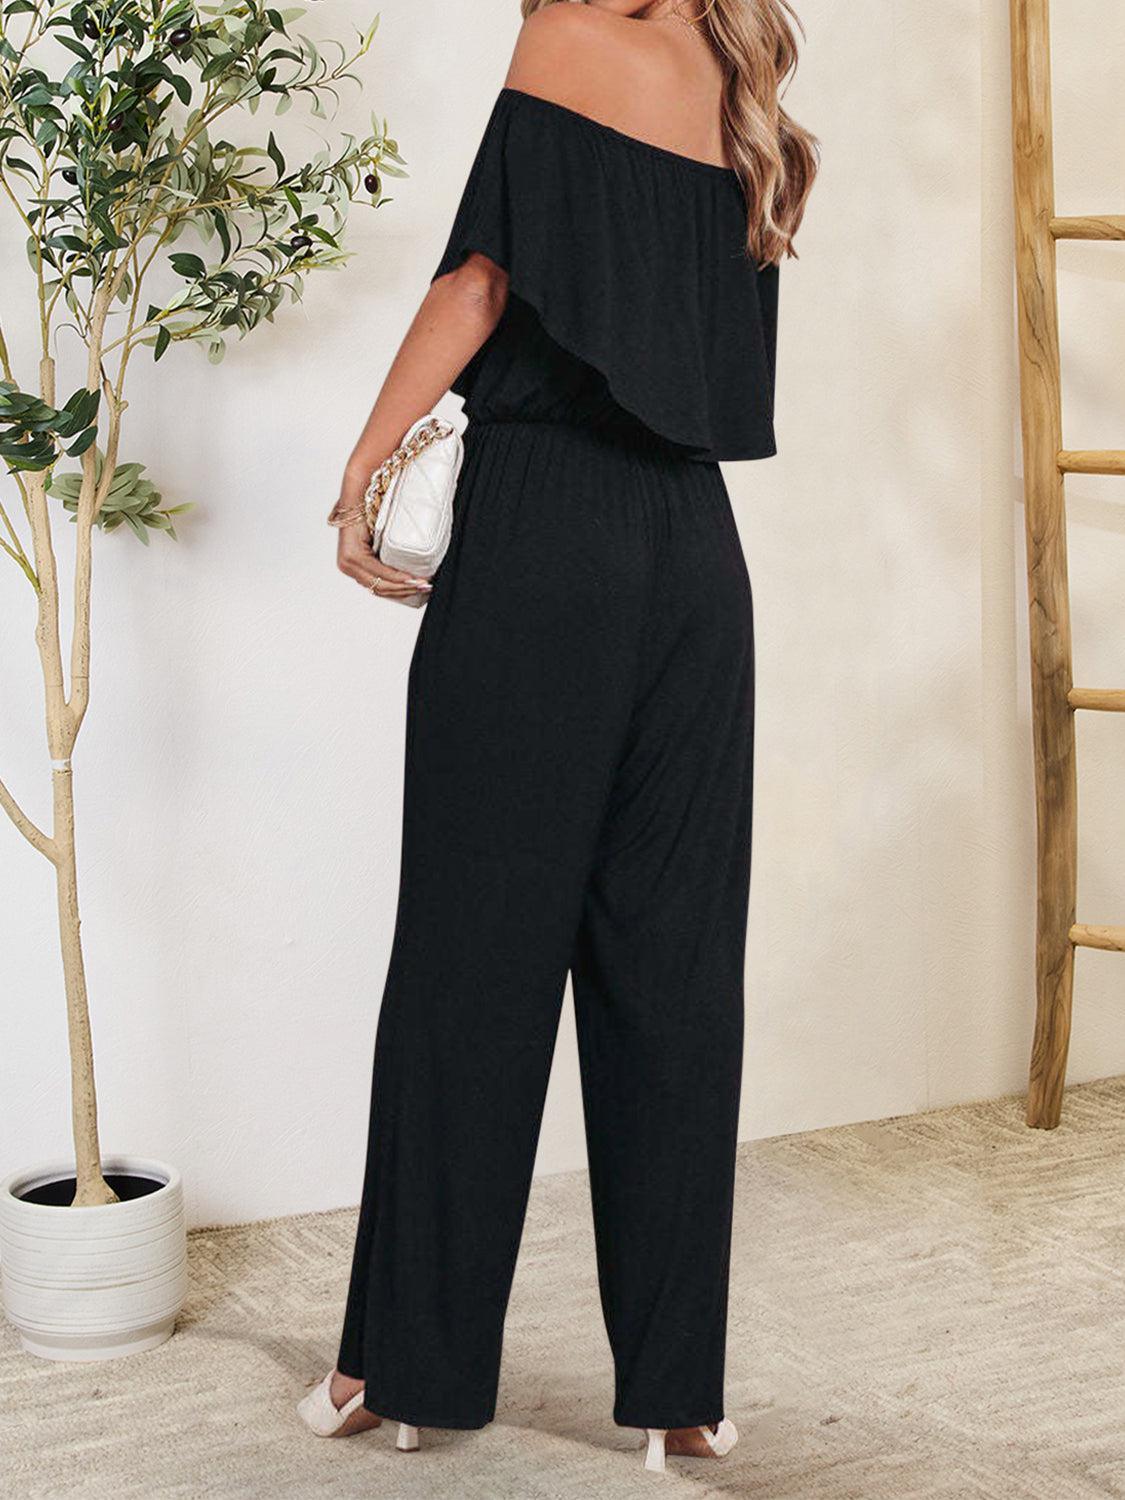 a woman wearing a black jumpsuit and a white purse